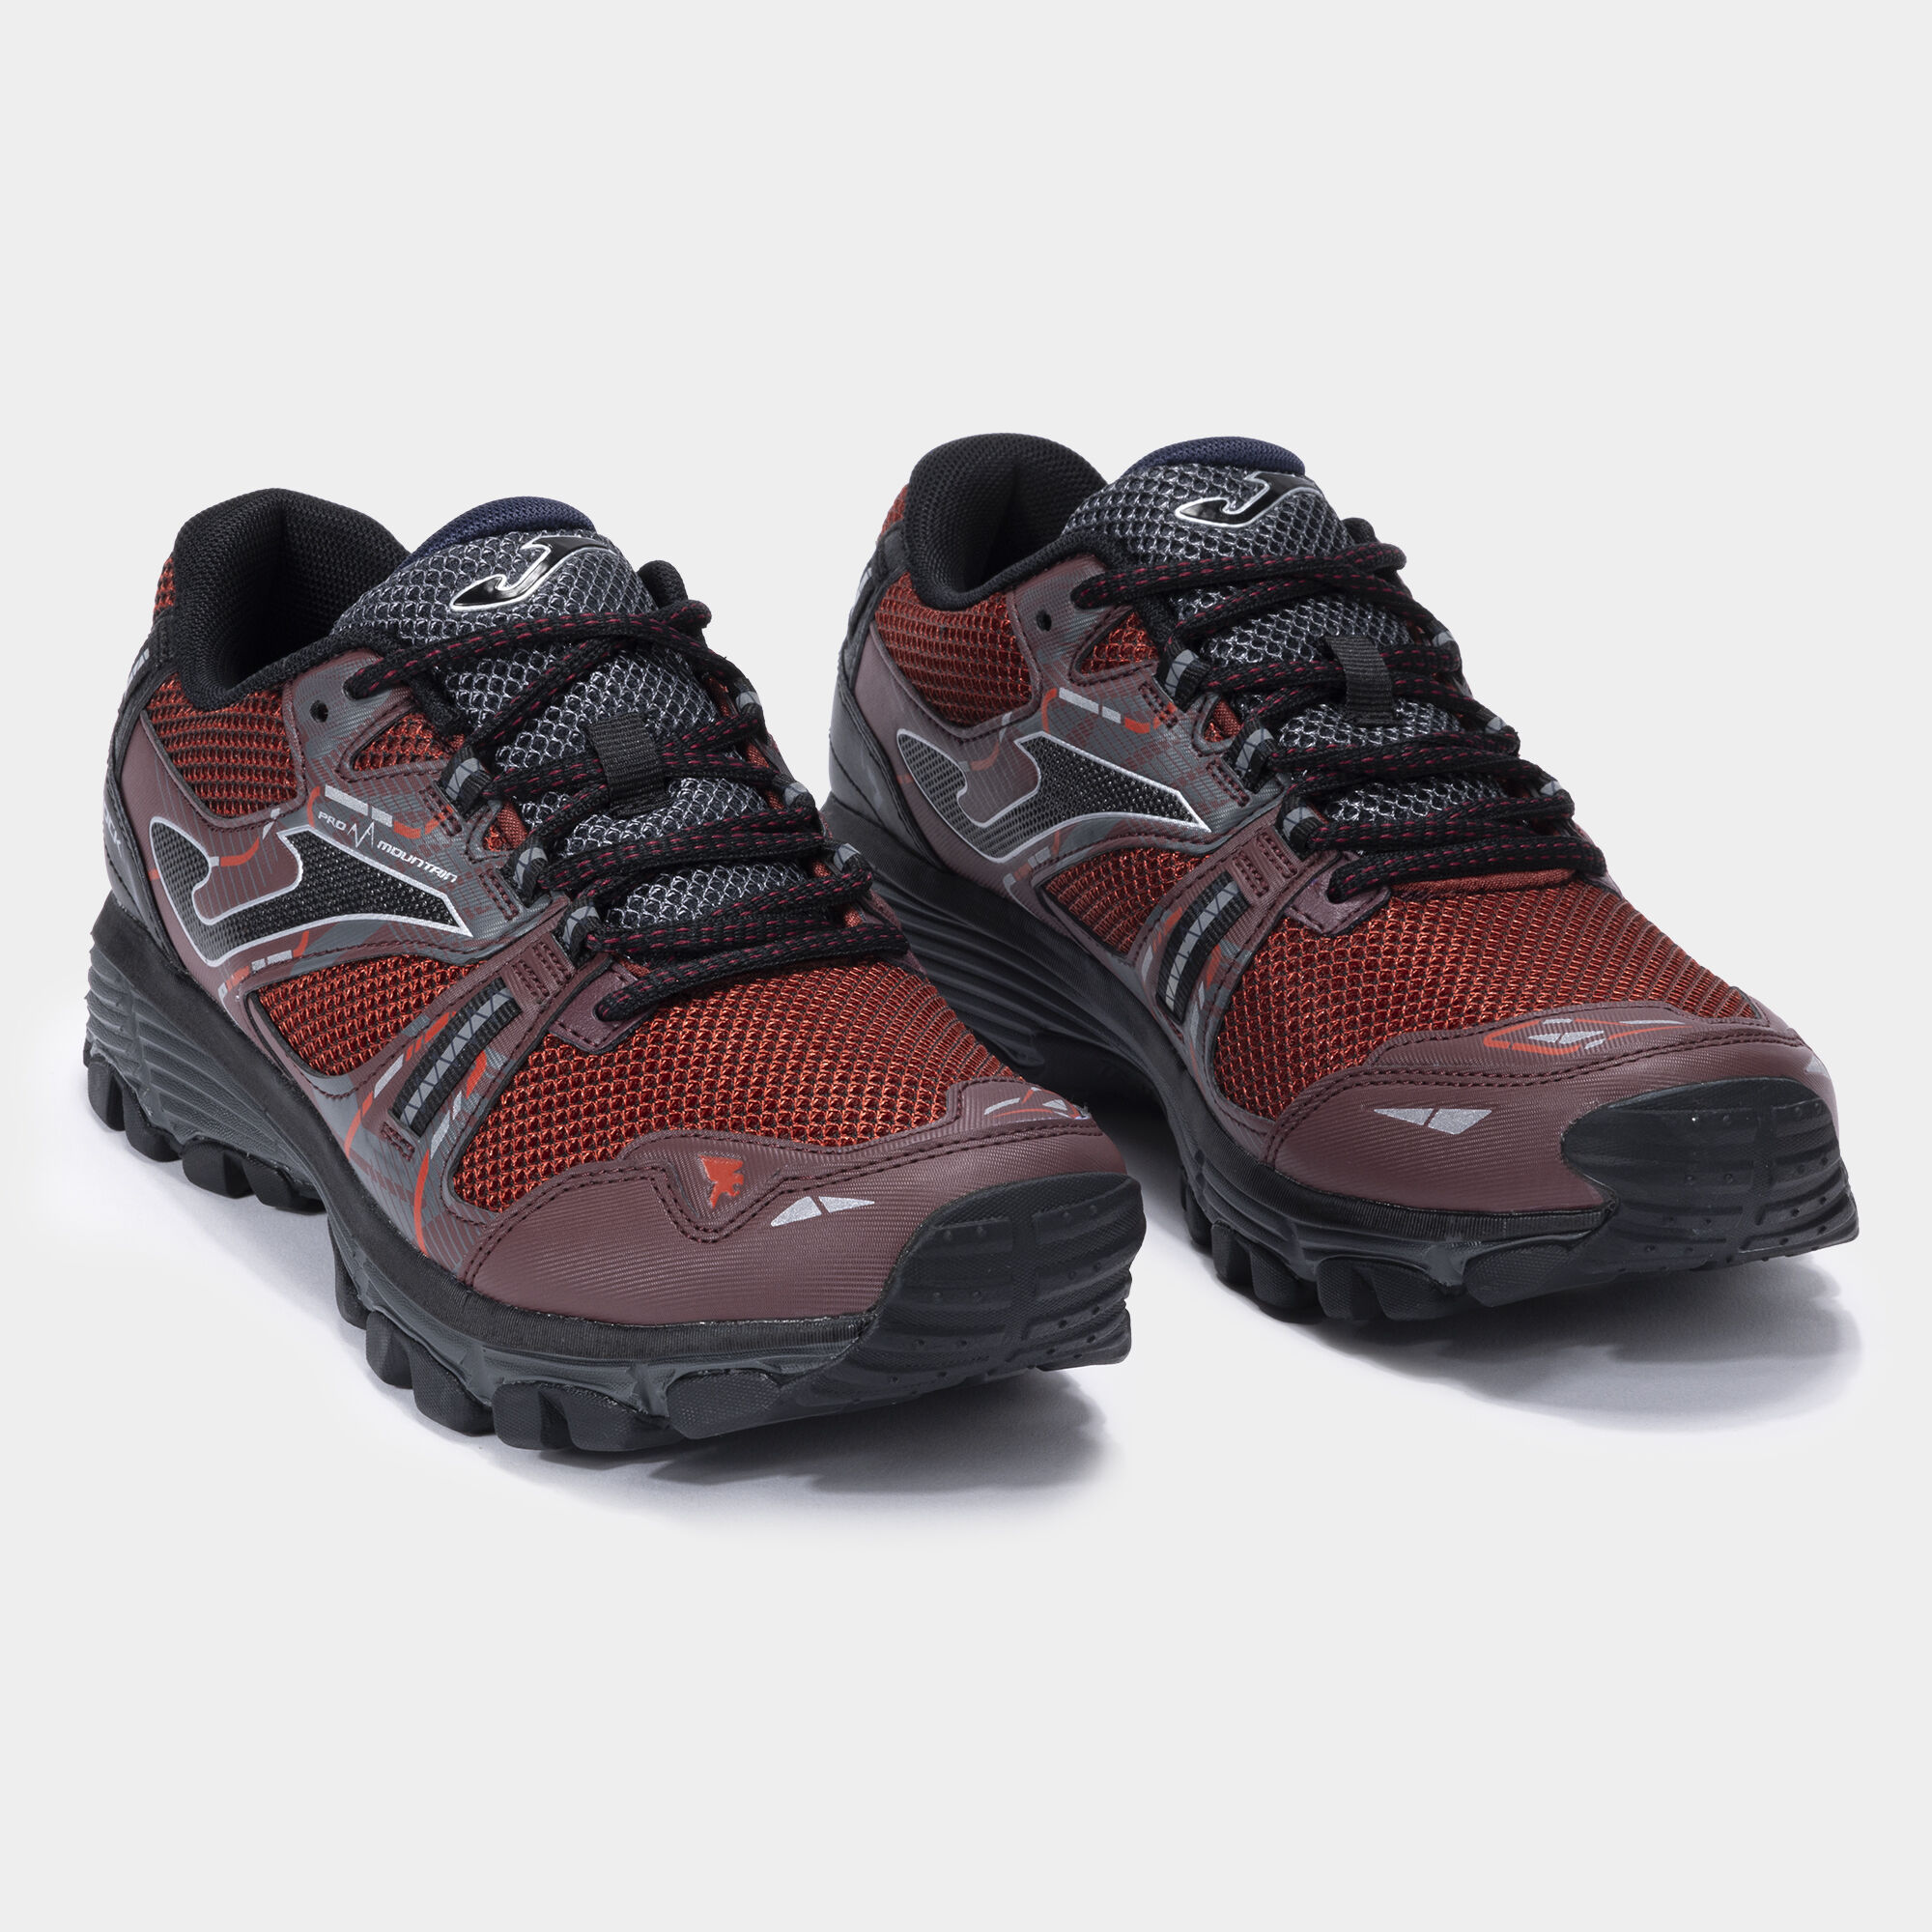 Chaussures trail running Shock Men 24 homme rouge